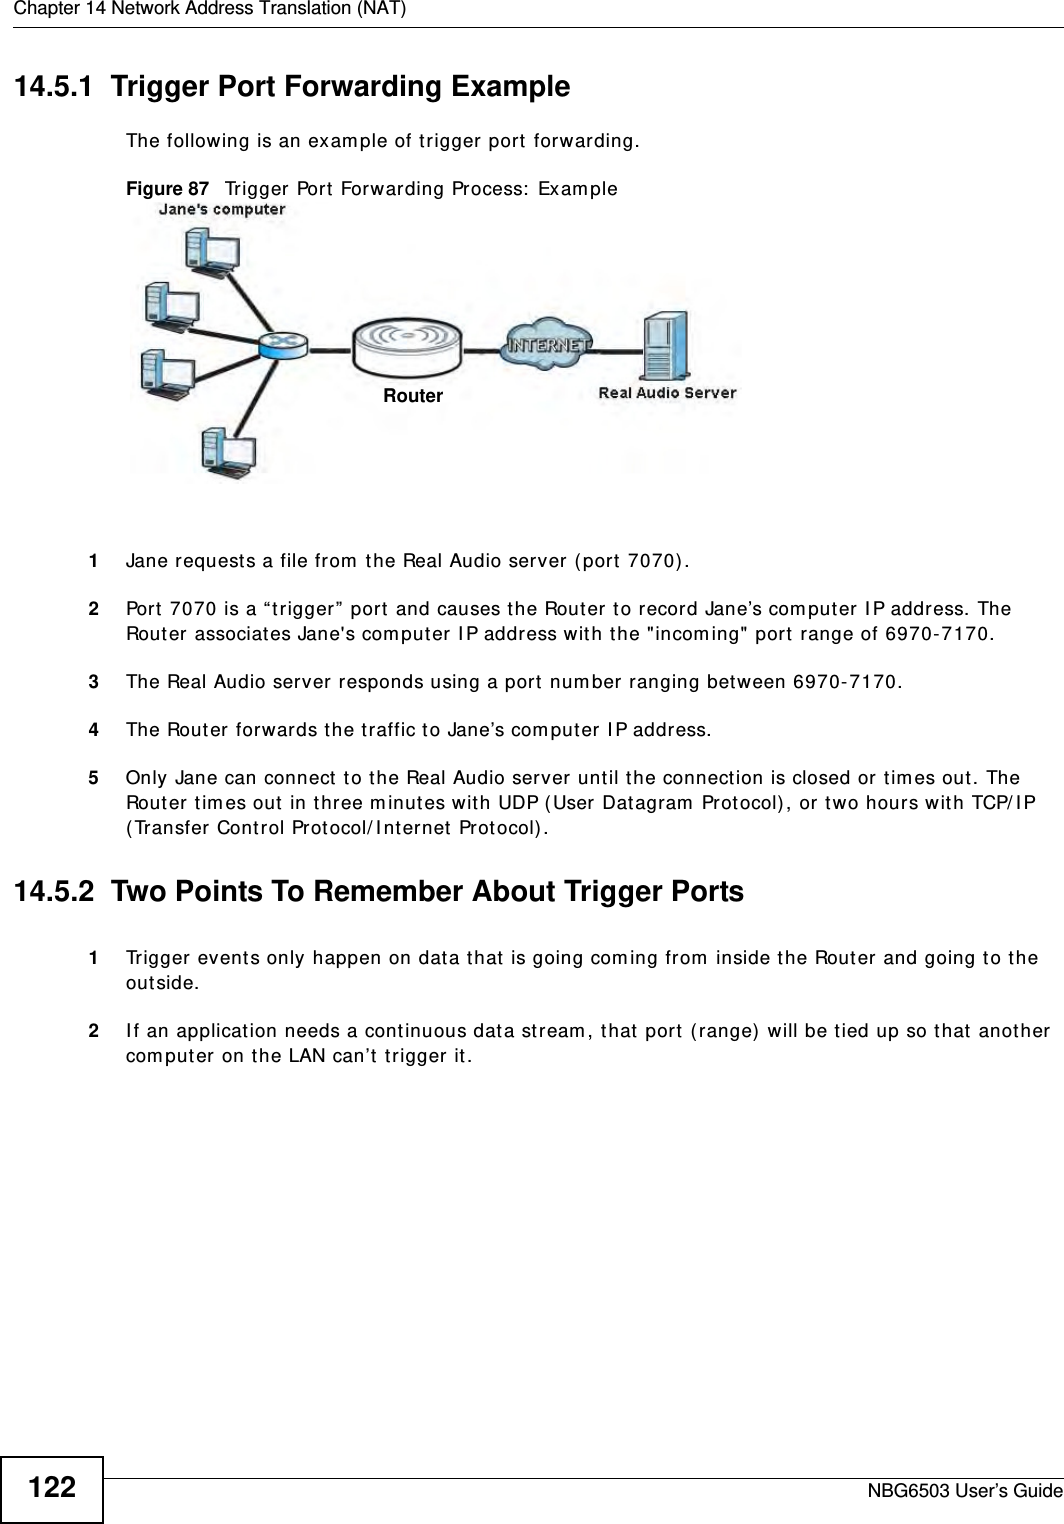 Chapter 14 Network Address Translation (NAT)NBG6503 User’s Guide12214.5.1  Trigger Port Forwarding Example The following is an example of trigger port forwarding.Figure 87   Trigger Port Forwarding Process: Example1Jane requests a file from the Real Audio server (port 7070).2Port 7070 is a “trigger” port and causes the Router to record Jane’s computer IP address. The Router associates Jane&apos;s computer IP address with the &quot;incoming&quot; port range of 6970-7170.3The Real Audio server responds using a port number ranging between 6970-7170.4The Router forwards the traffic to Jane’s computer IP address. 5Only Jane can connect to the Real Audio server until the connection is closed or times out. The Router times out in three minutes with UDP (User Datagram Protocol), or two hours with TCP/IP (Transfer Control Protocol/Internet Protocol). 14.5.2  Two Points To Remember About Trigger Ports1Trigger events only happen on data that is going coming from inside the Router and going to the outside.2If an application needs a continuous data stream, that port (range) will be tied up so that another computer on the LAN can’t trigger it.RouterRouter